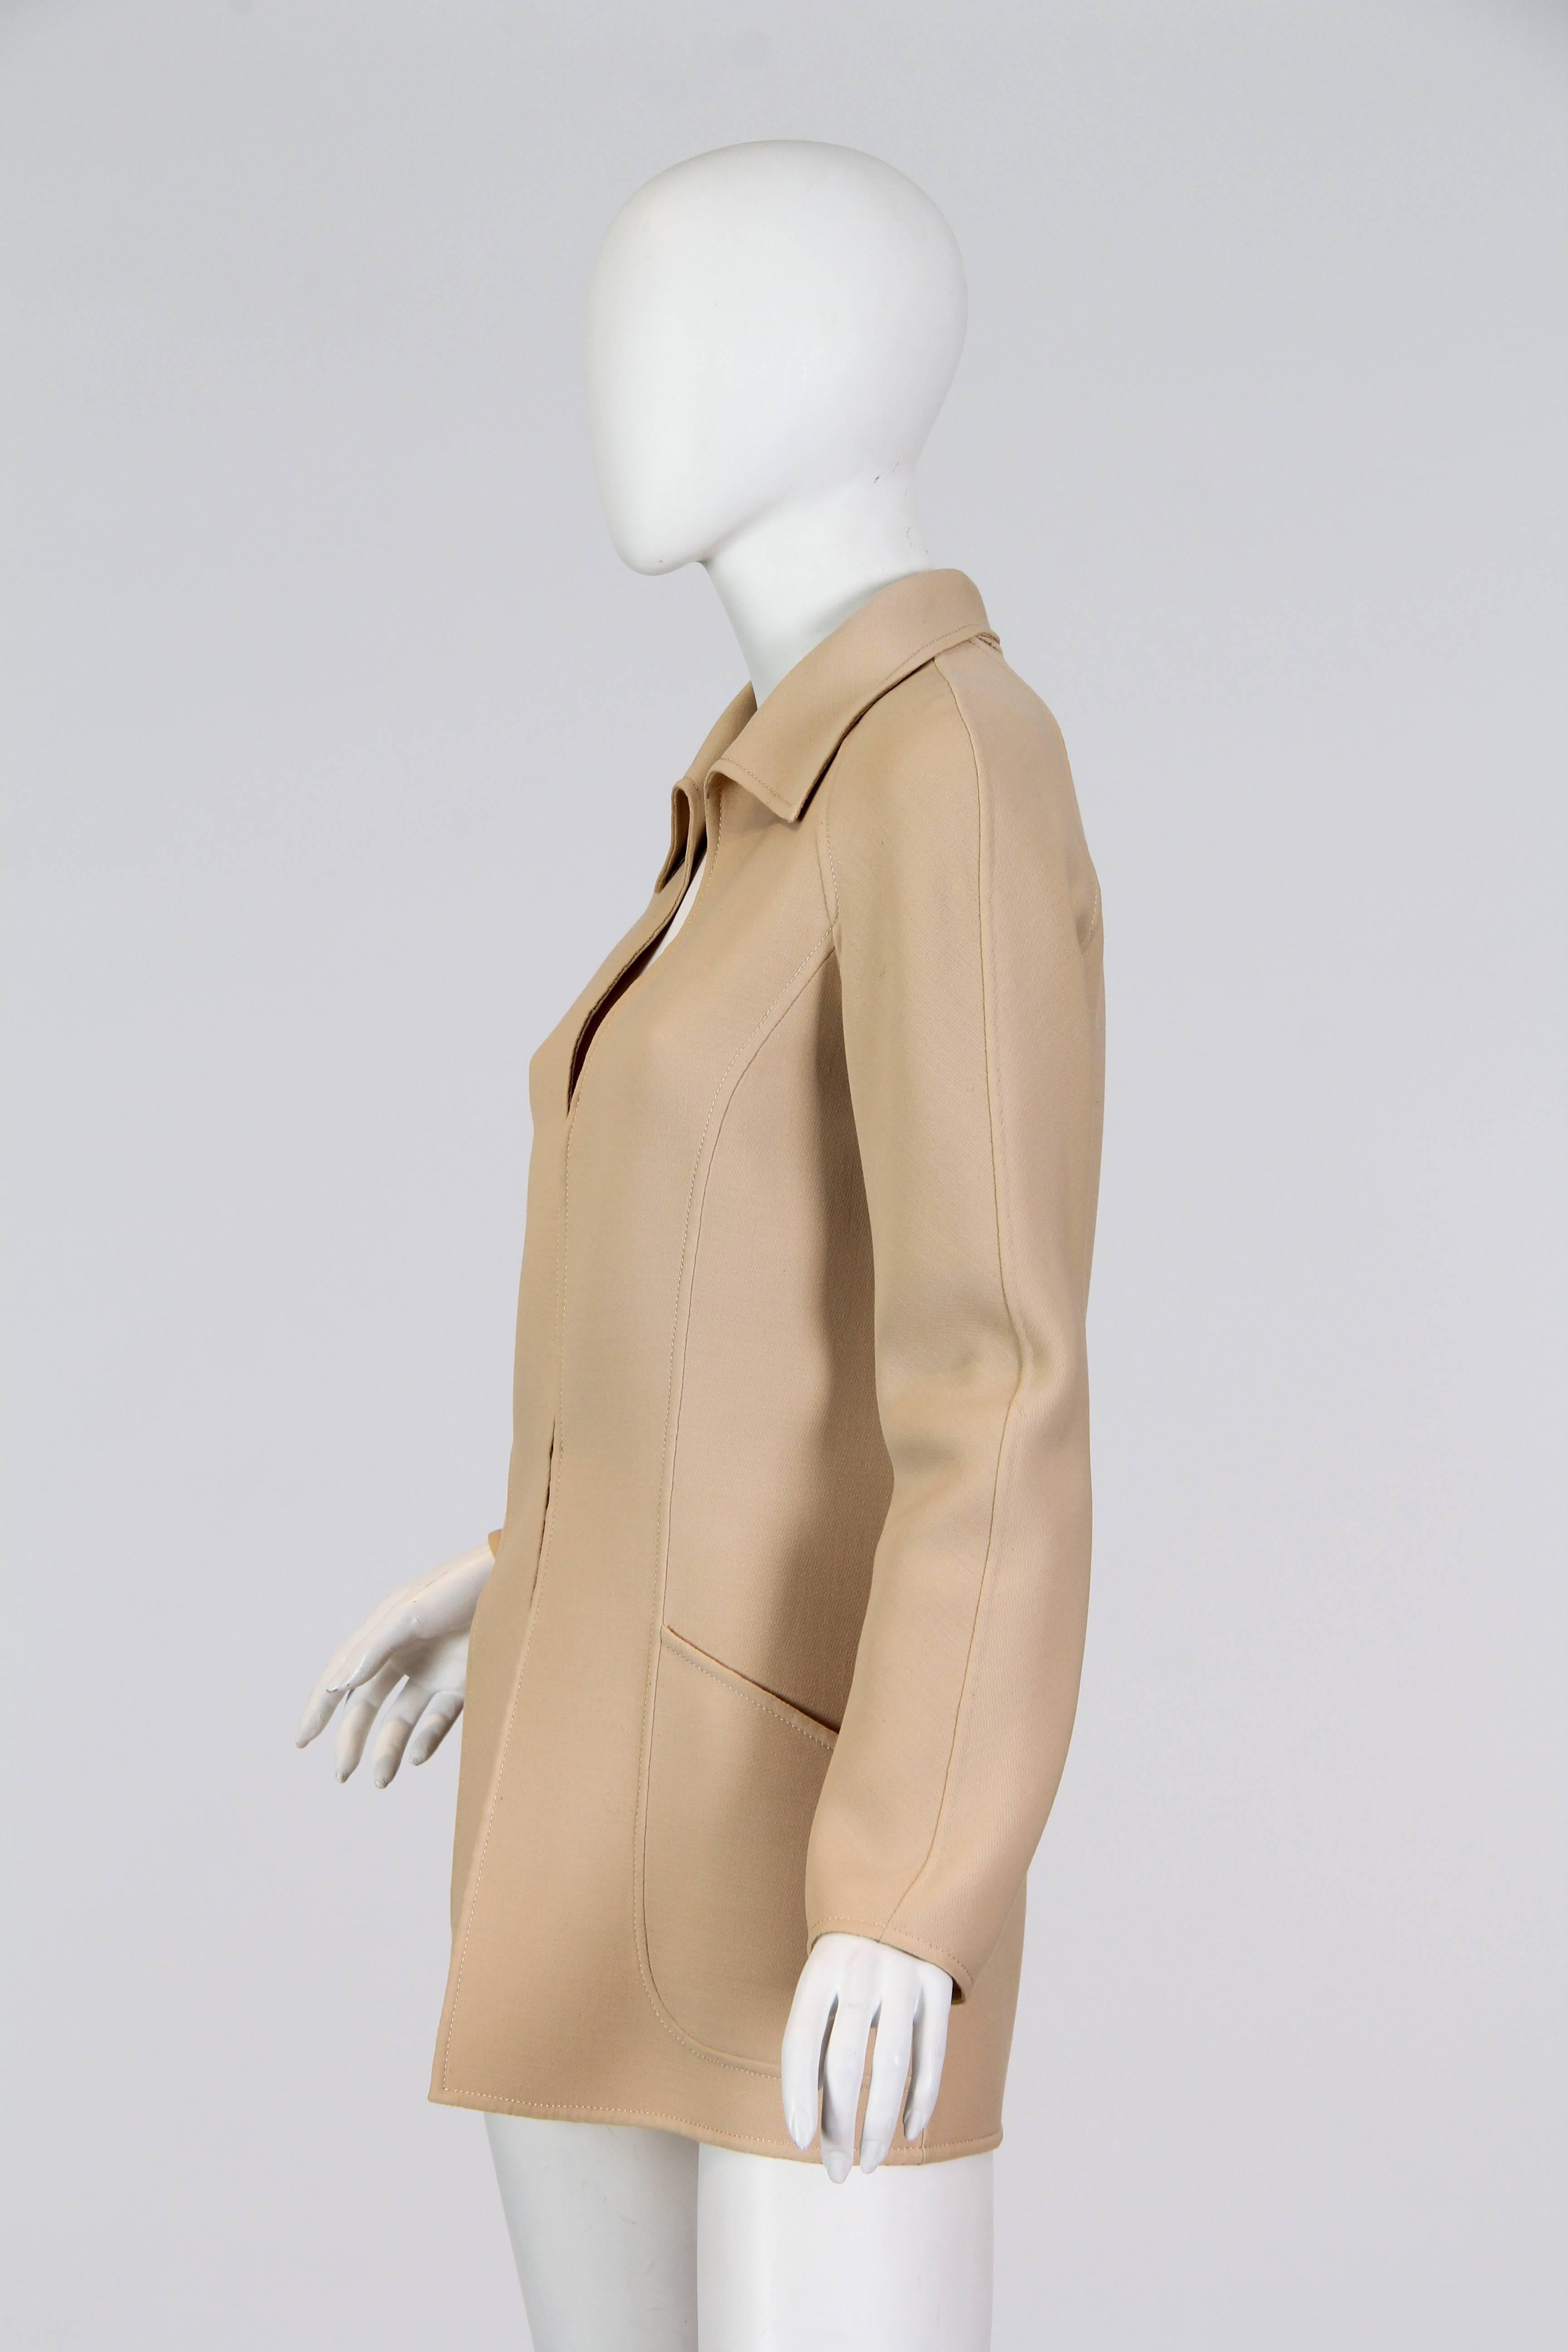 Valentino Couture 1960/70s Lightweight Wool Jacket In Excellent Condition In New York, NY